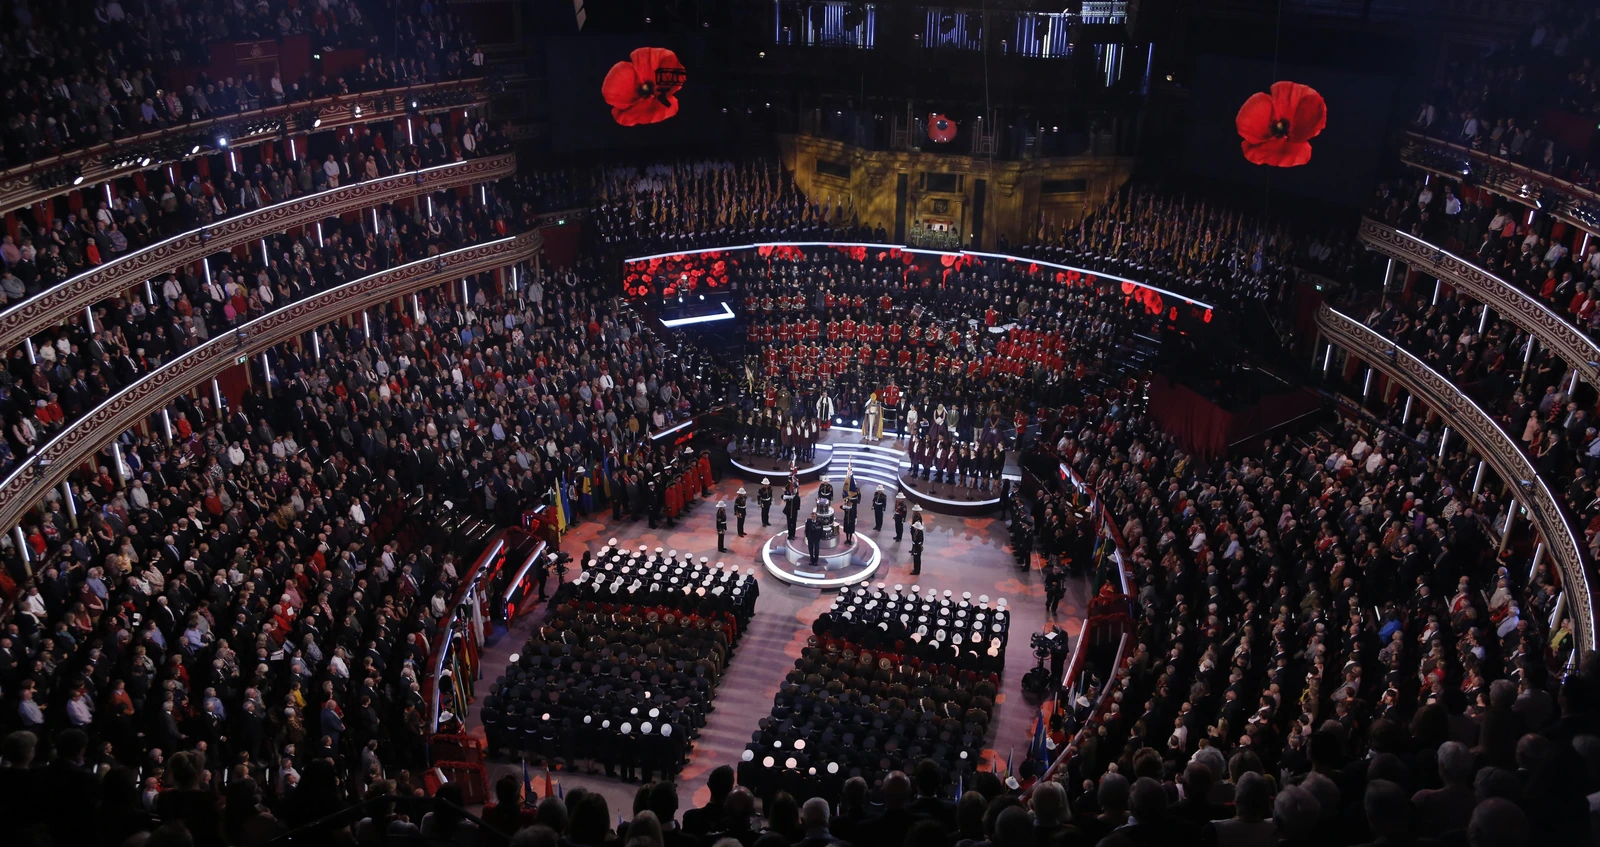 Festival of Remembrance with audience